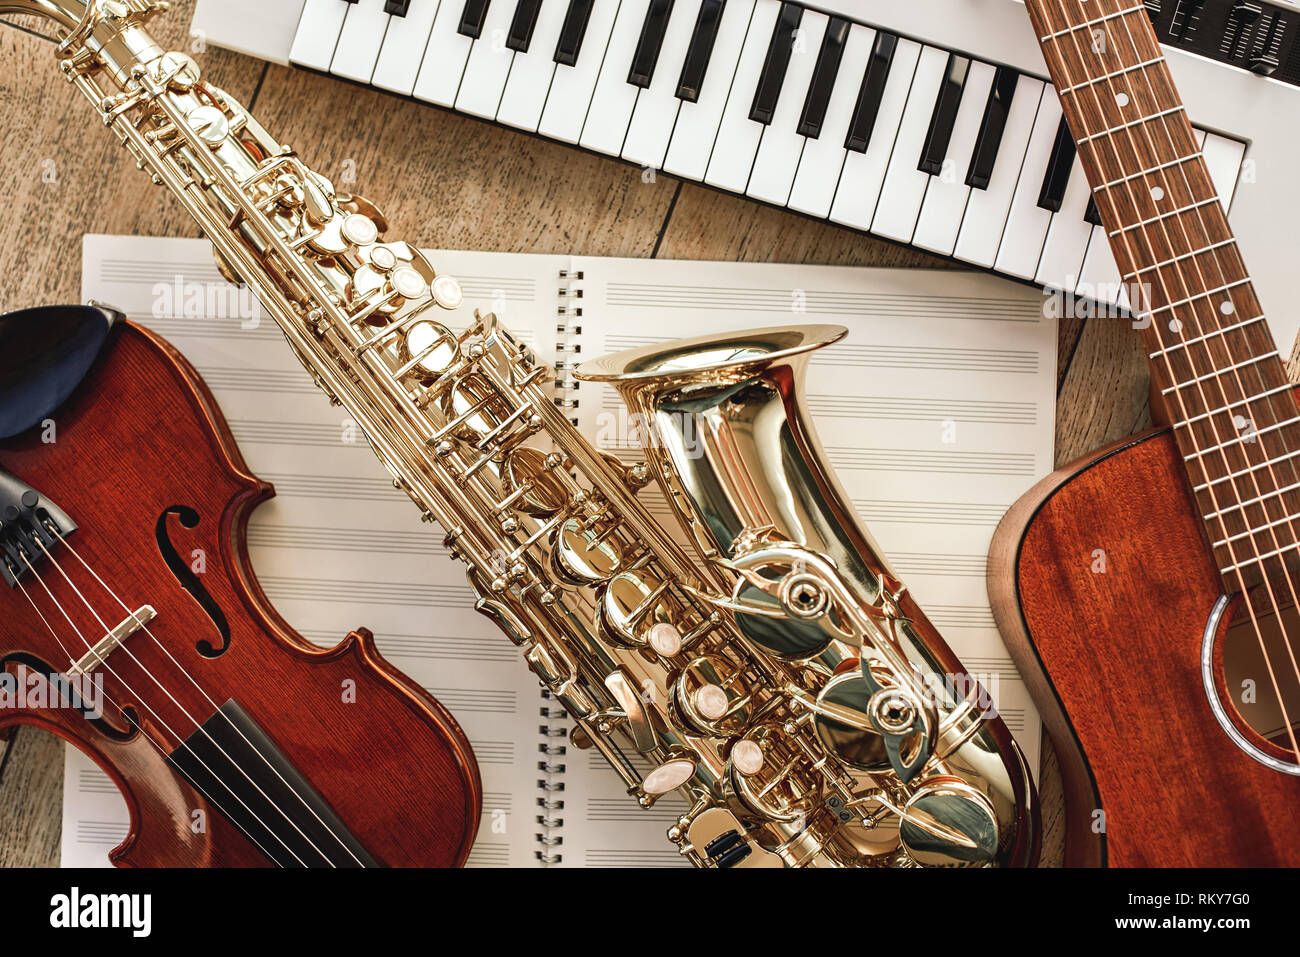 Power of music. Top view of musical instruments set: synthesizer, guitar, saxophone and violin lying on the sheets for music notes over wooden floor. Musical instruments. Music equipment Stock Photo